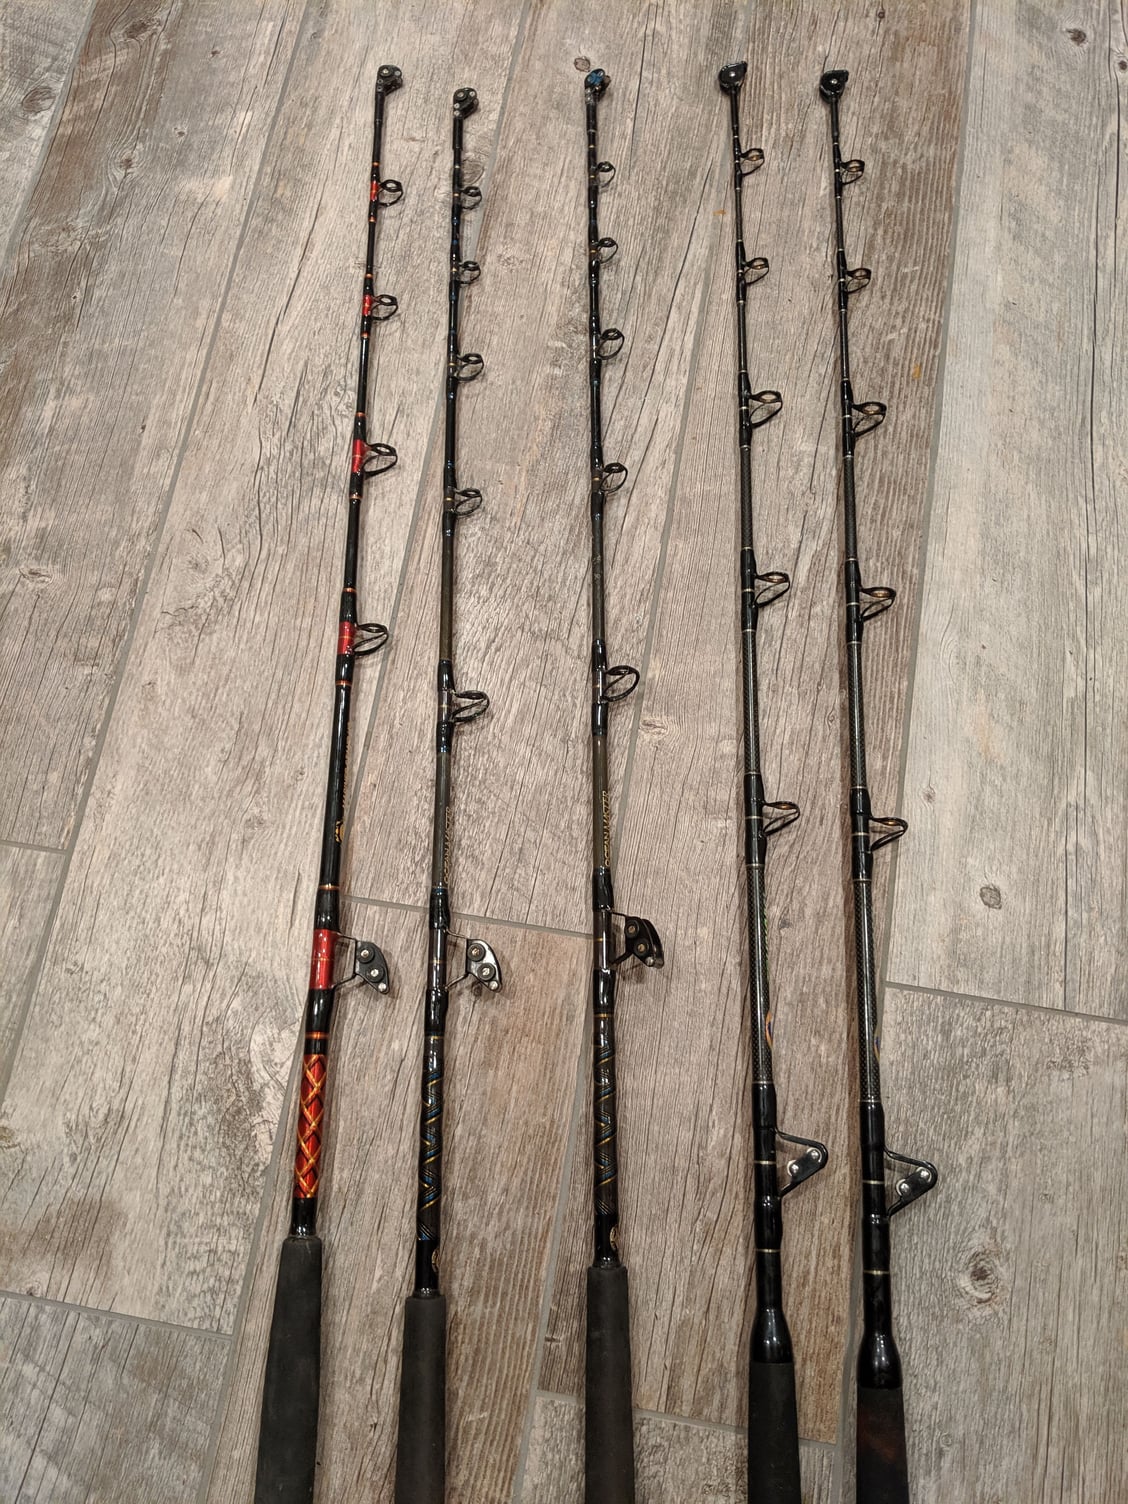 Misc boat rods - The Hull Truth - Boating and Fishing Forum